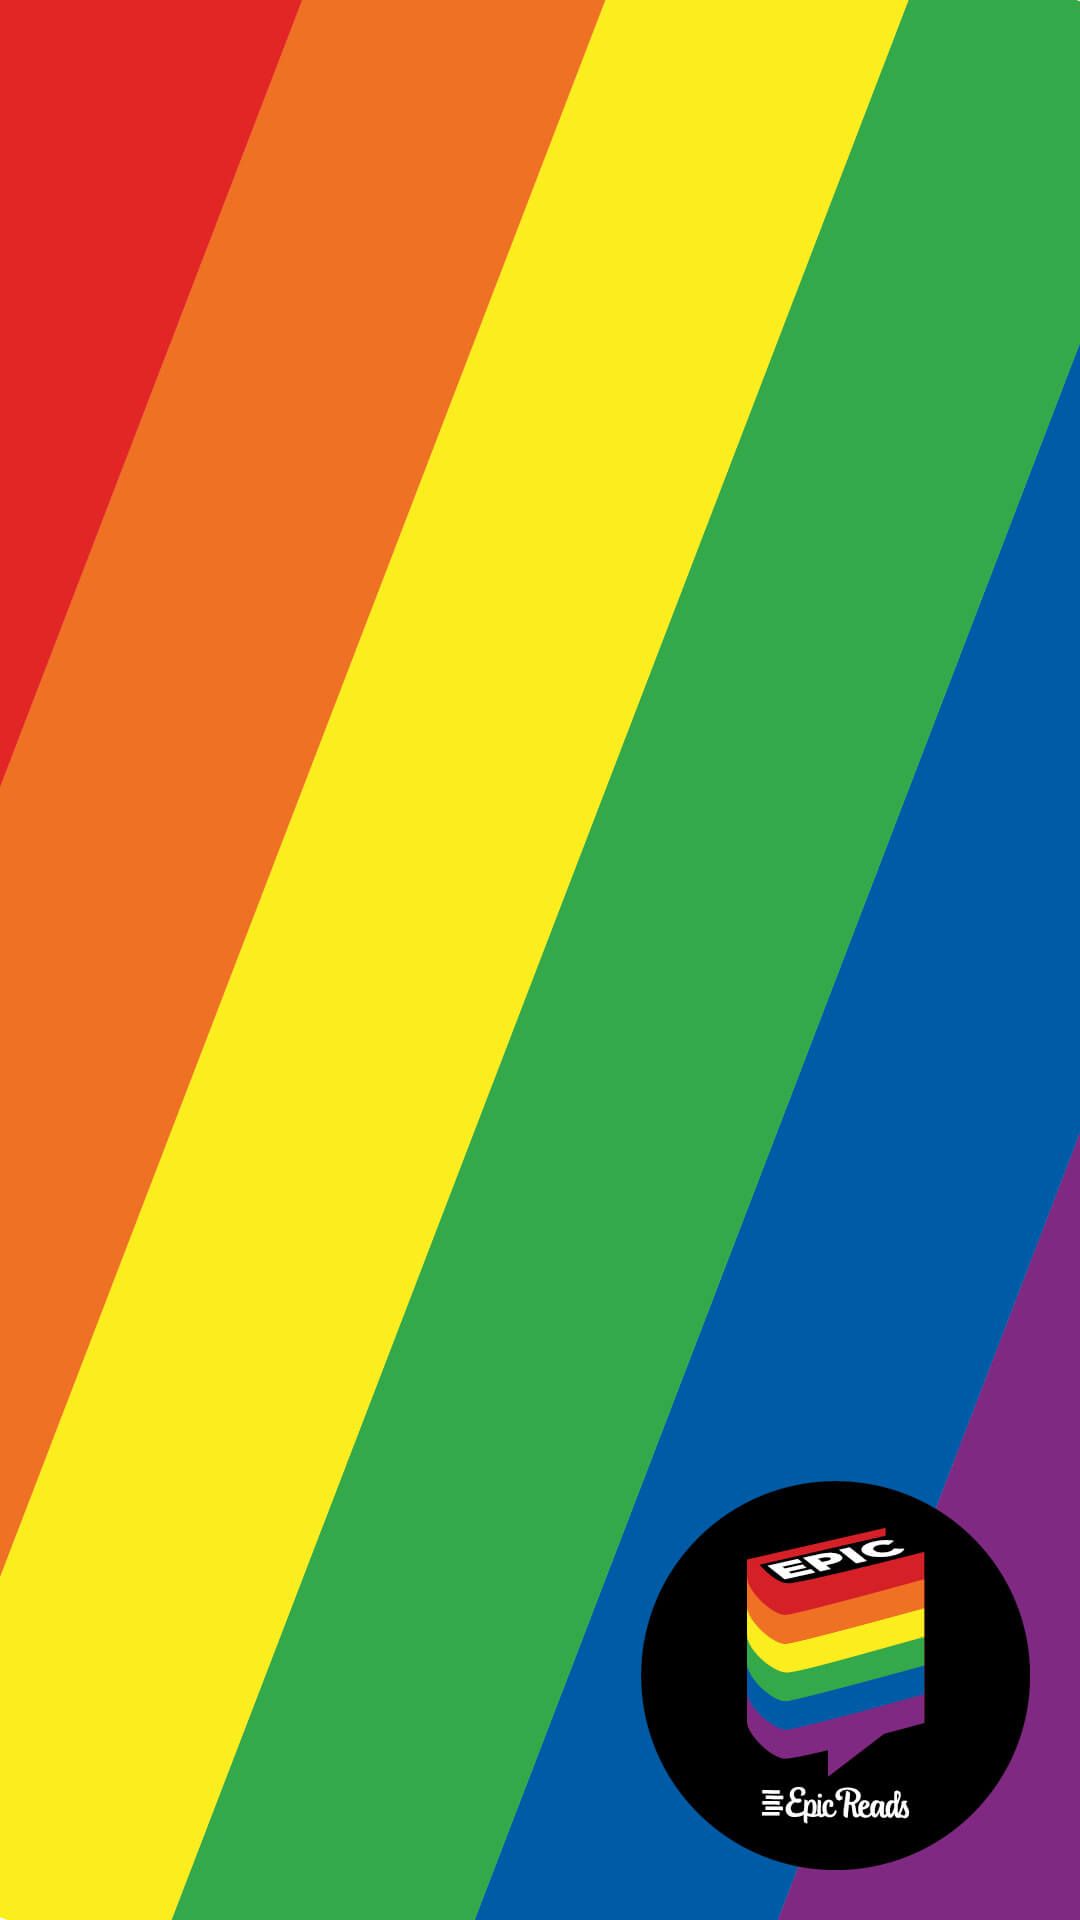 Pride wallpaper by Das4Life - Download on ZEDGE™